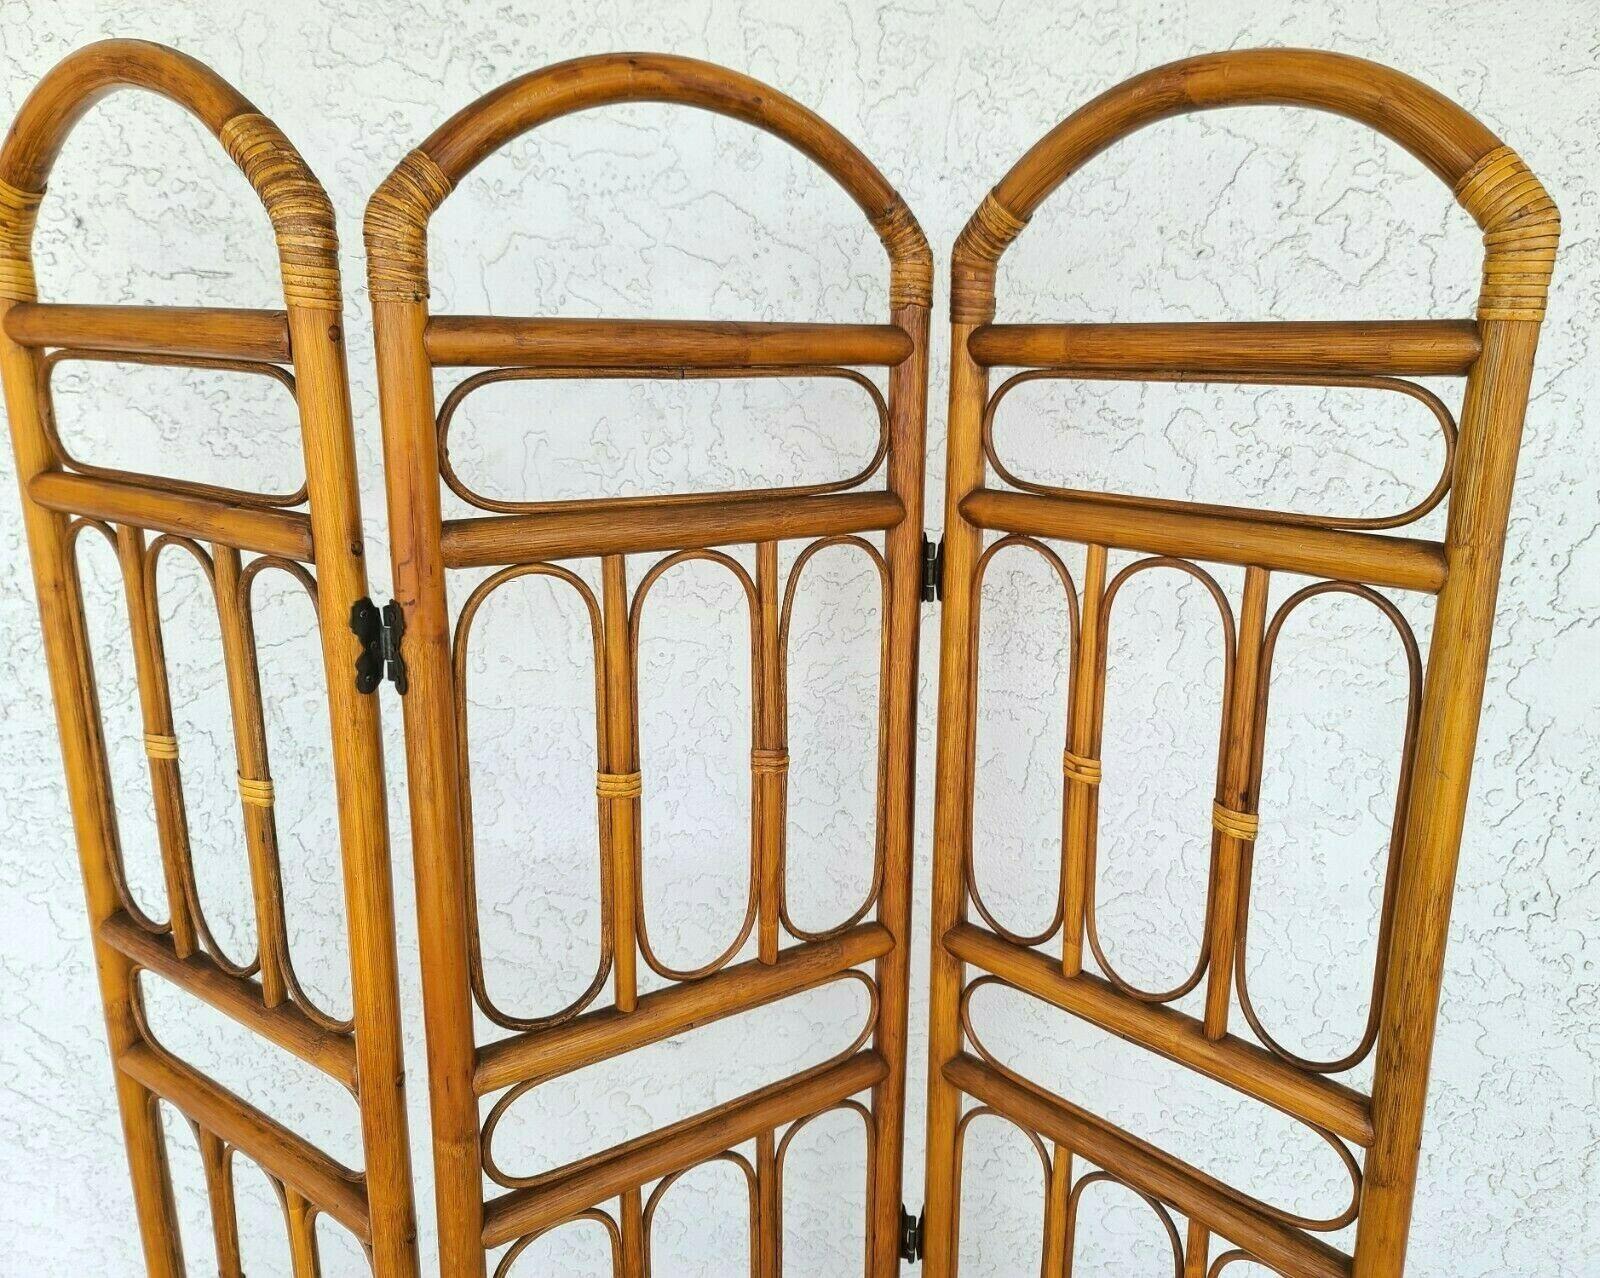 Offering One Of Our Recent Palm Beach Estate Fine Furniture Acquisitions Of A
1970's Vintage FRANCO ALBINI Style Rattan Bamboo Room Divider Screen Paravant

Approximate Measurements in Inches
71